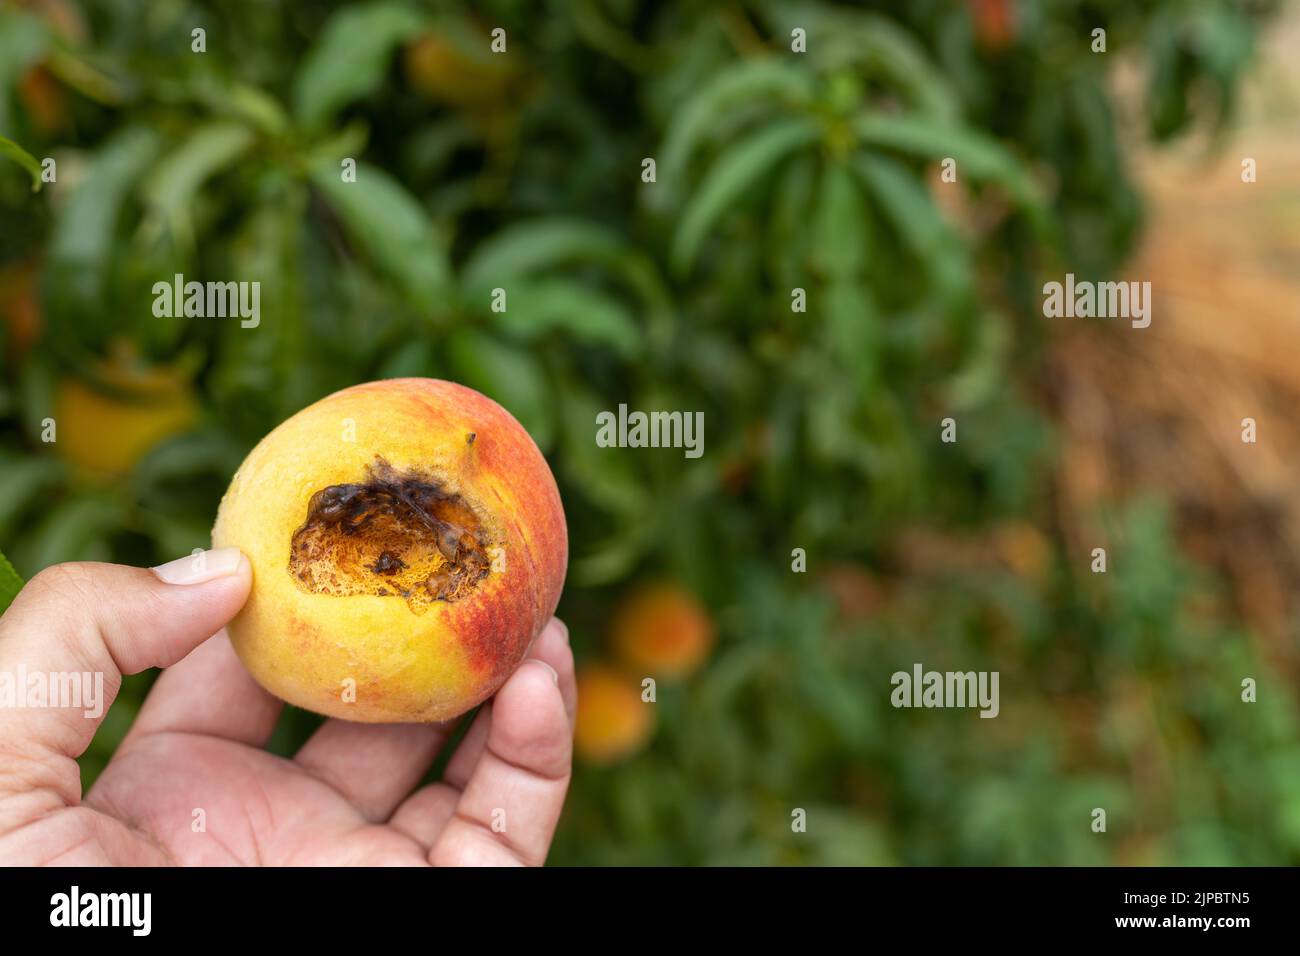 Closeup view of a rotten peach examining for fruit infection Stock Photo